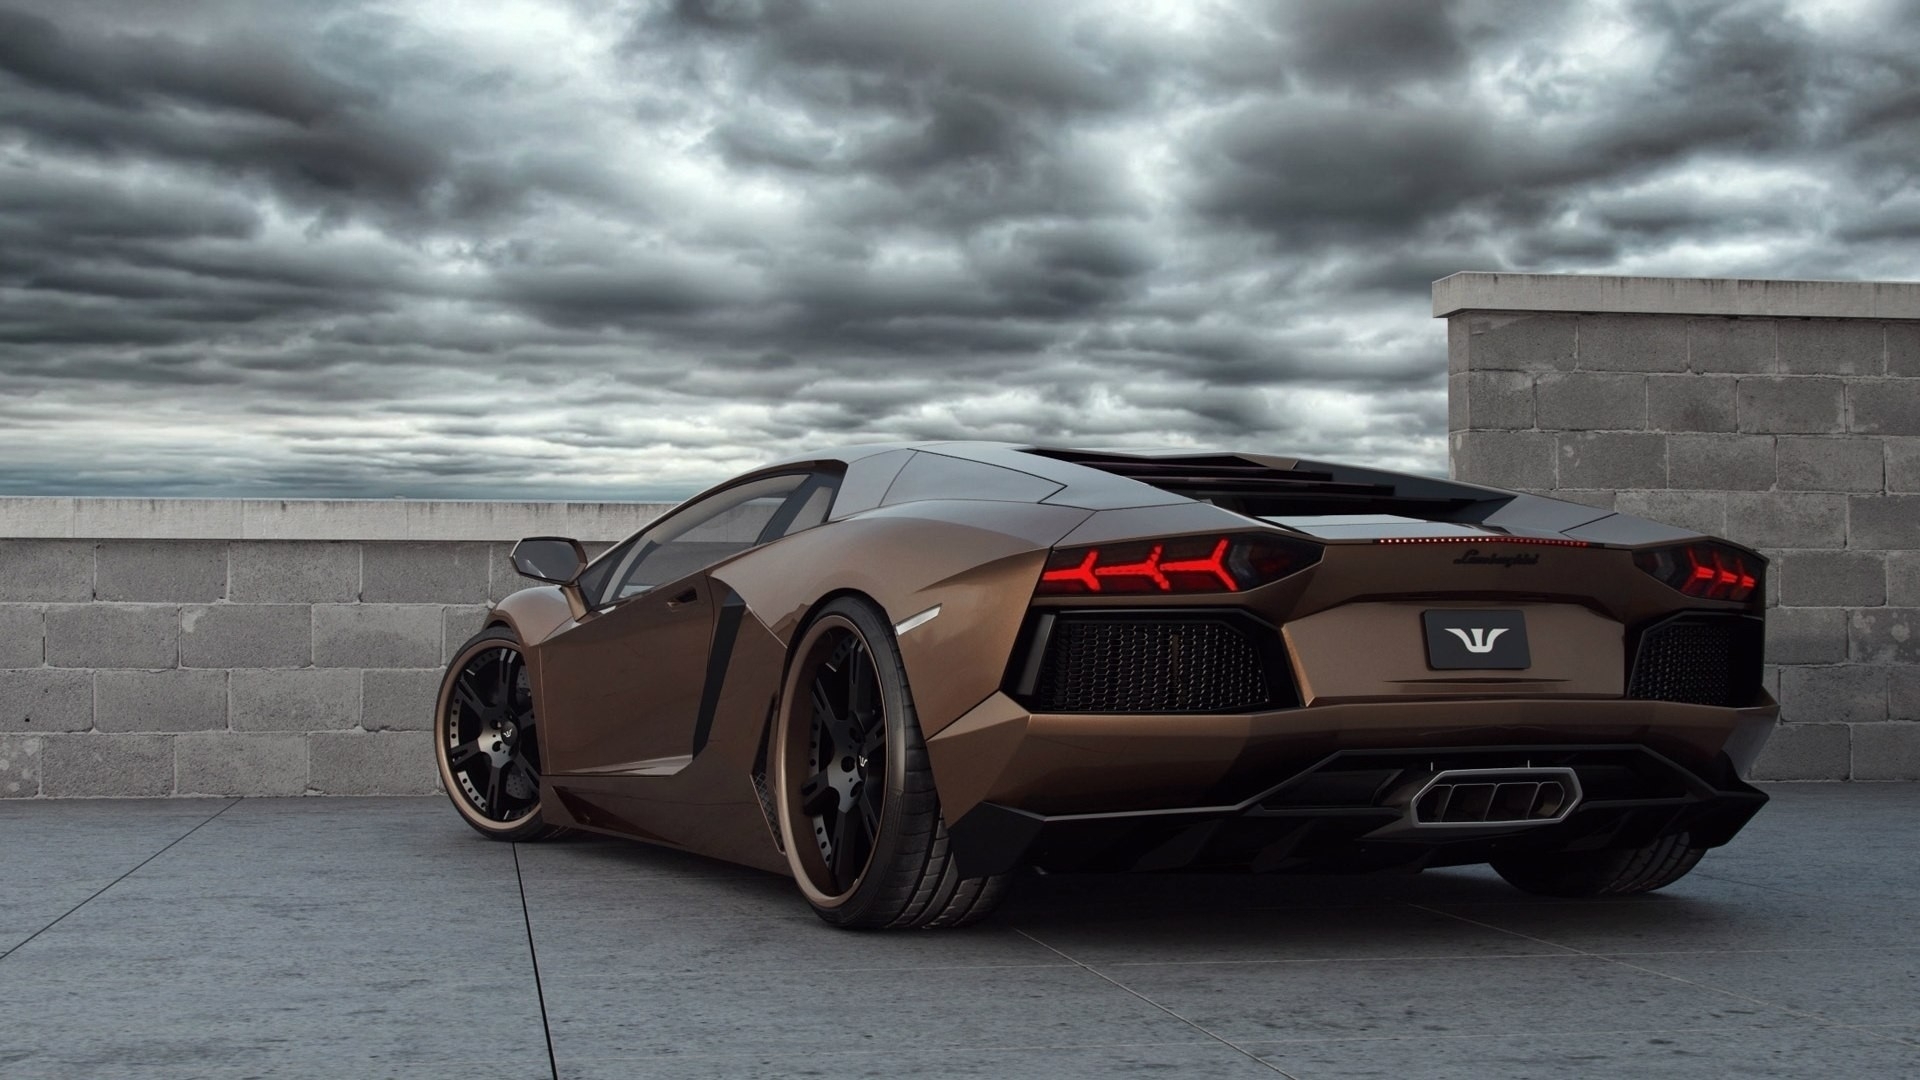 10 Most Popular Hd Wallpapers 1920X1080 Cars FULL HD 1920×1080 For PC Background